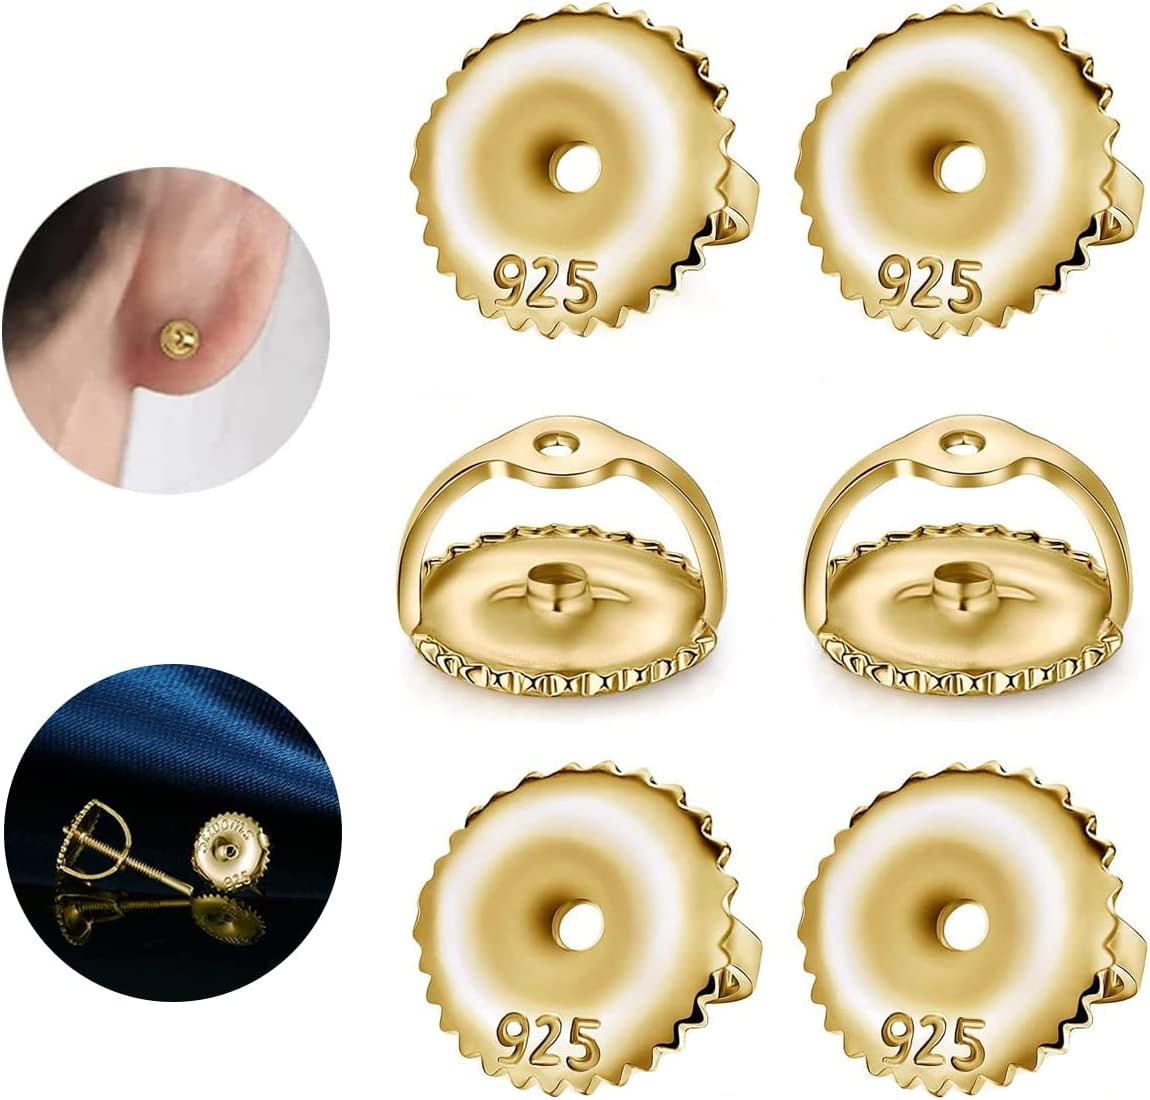 18k Replacement Screw Backs For Diamond Stud Earrings Solid Gold Y